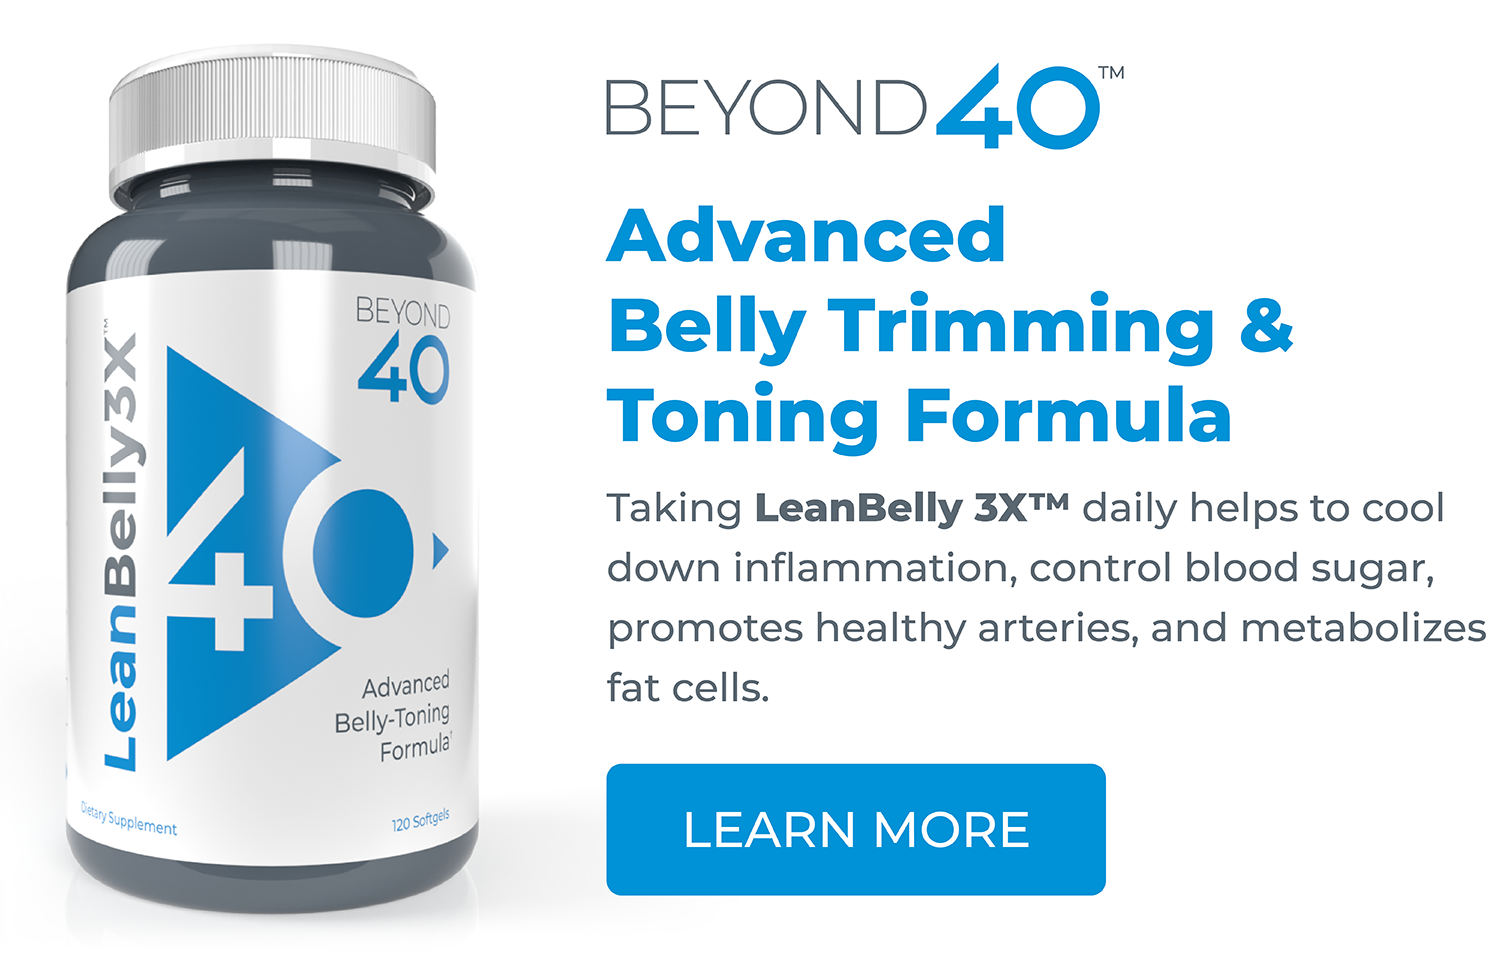 Beyond 40 LeanBelly 3X